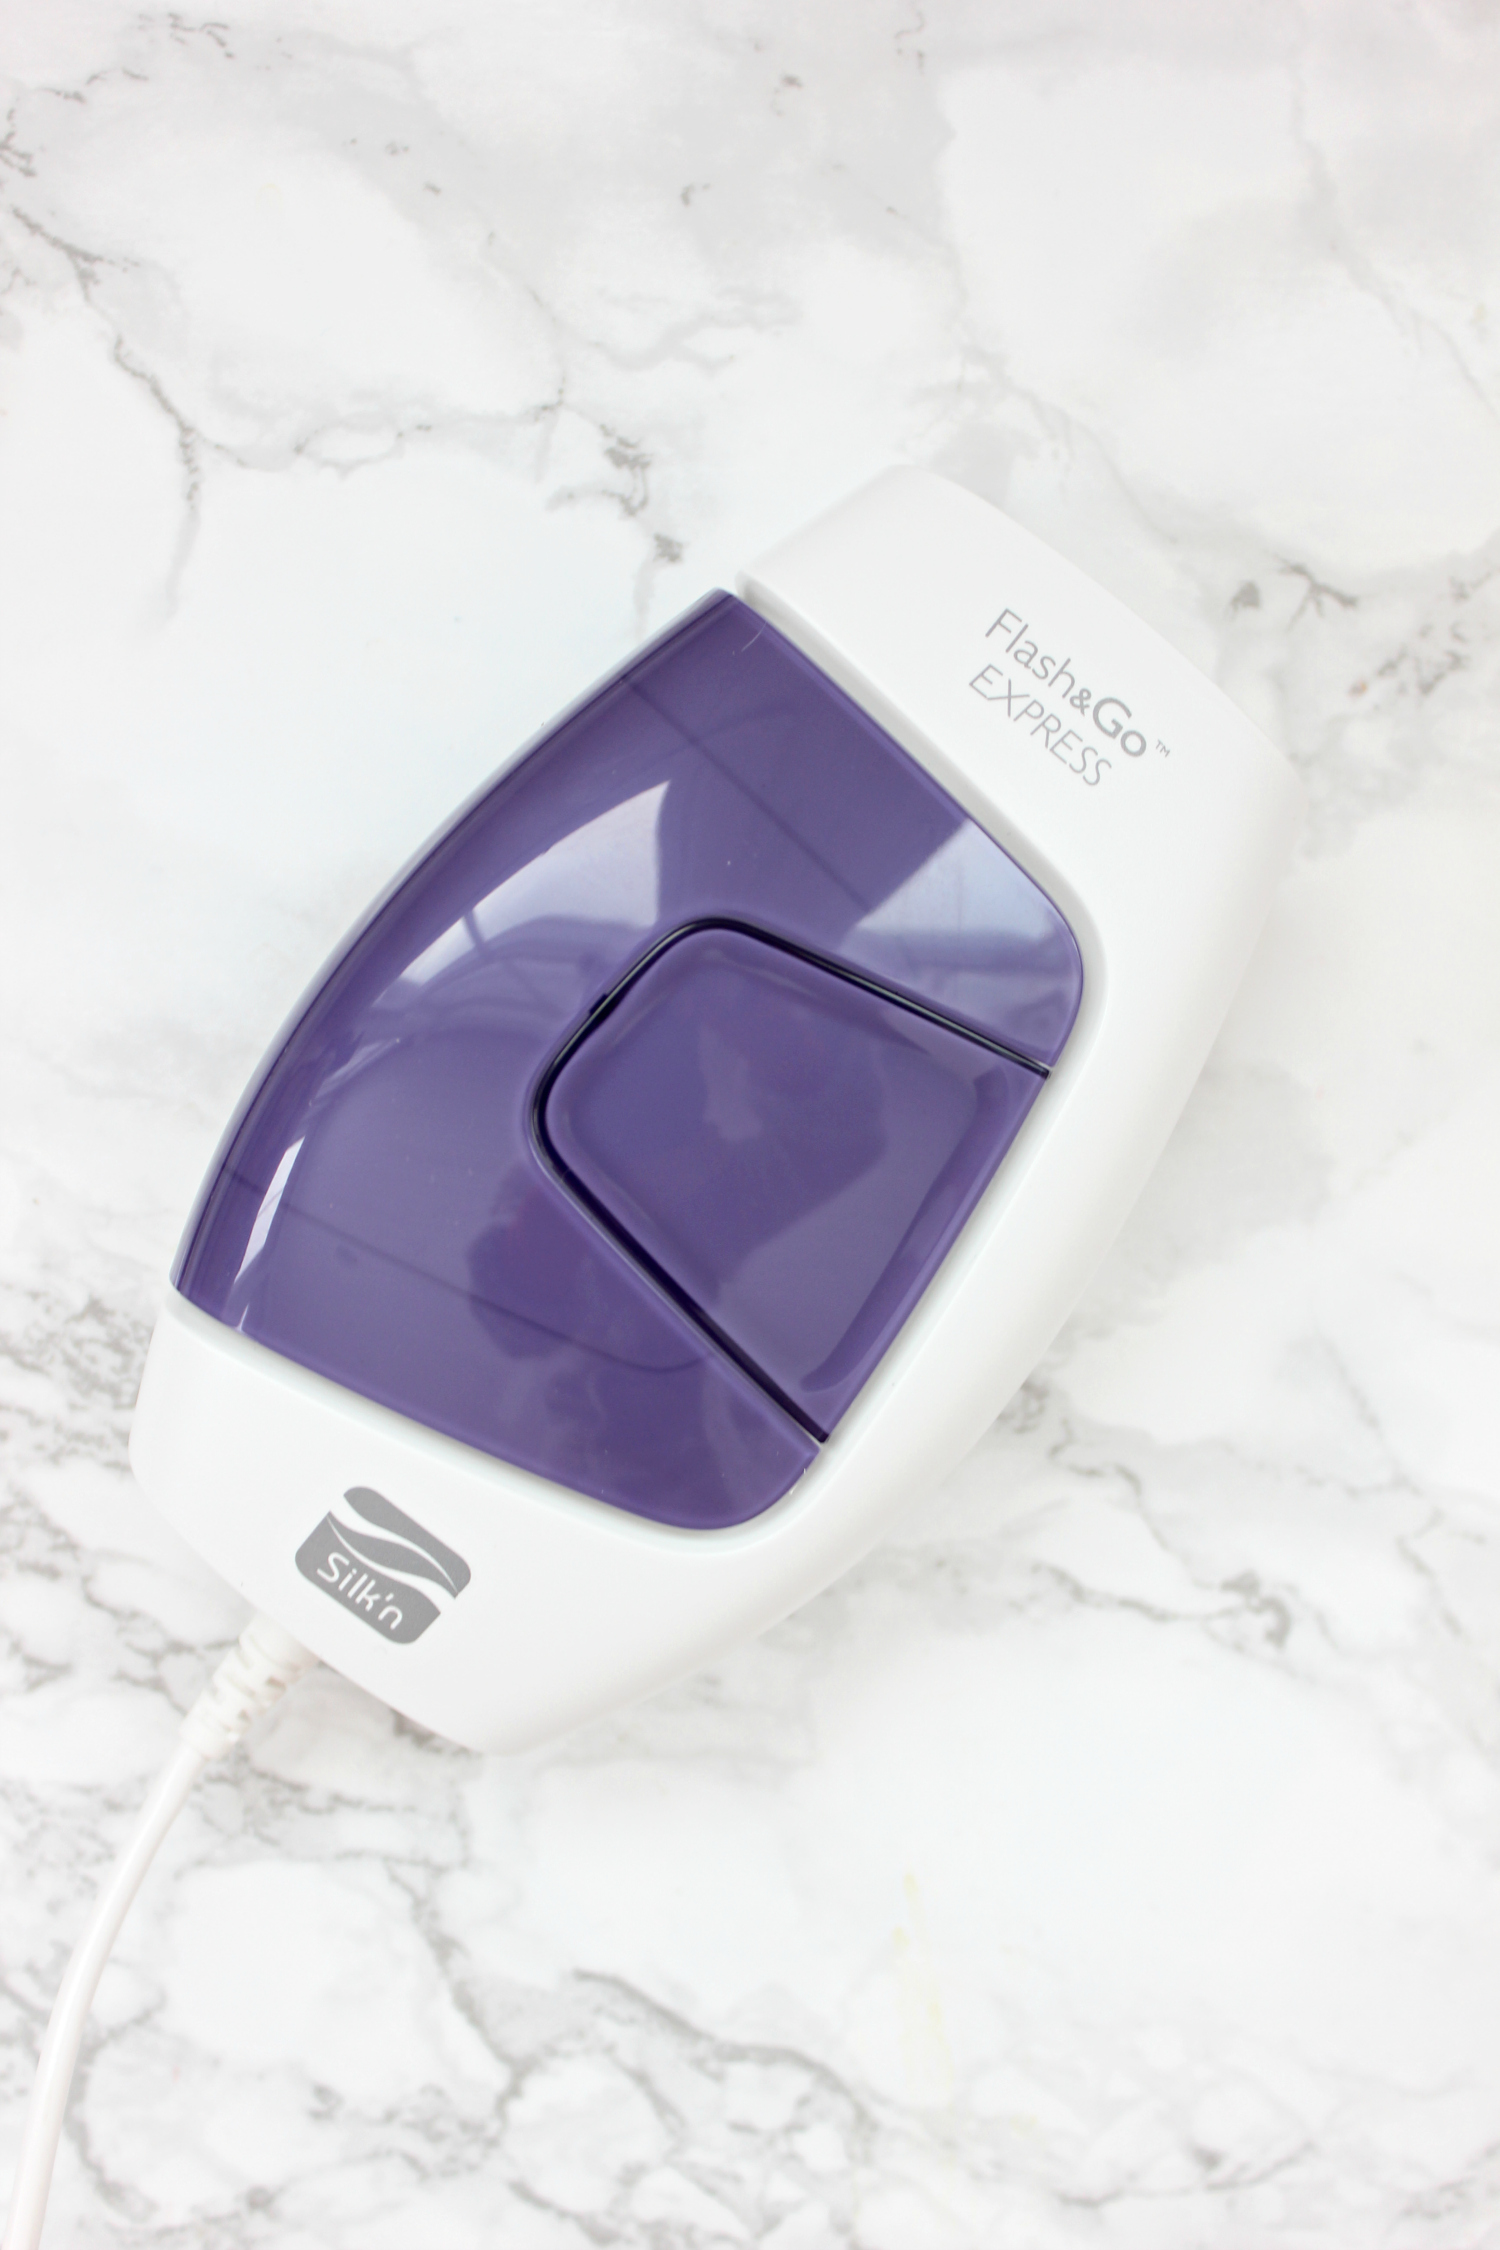 Silkn Flash and Go Express hair removal device review by beauty blogger Stephanie Ziajka on Diary of a Debutante